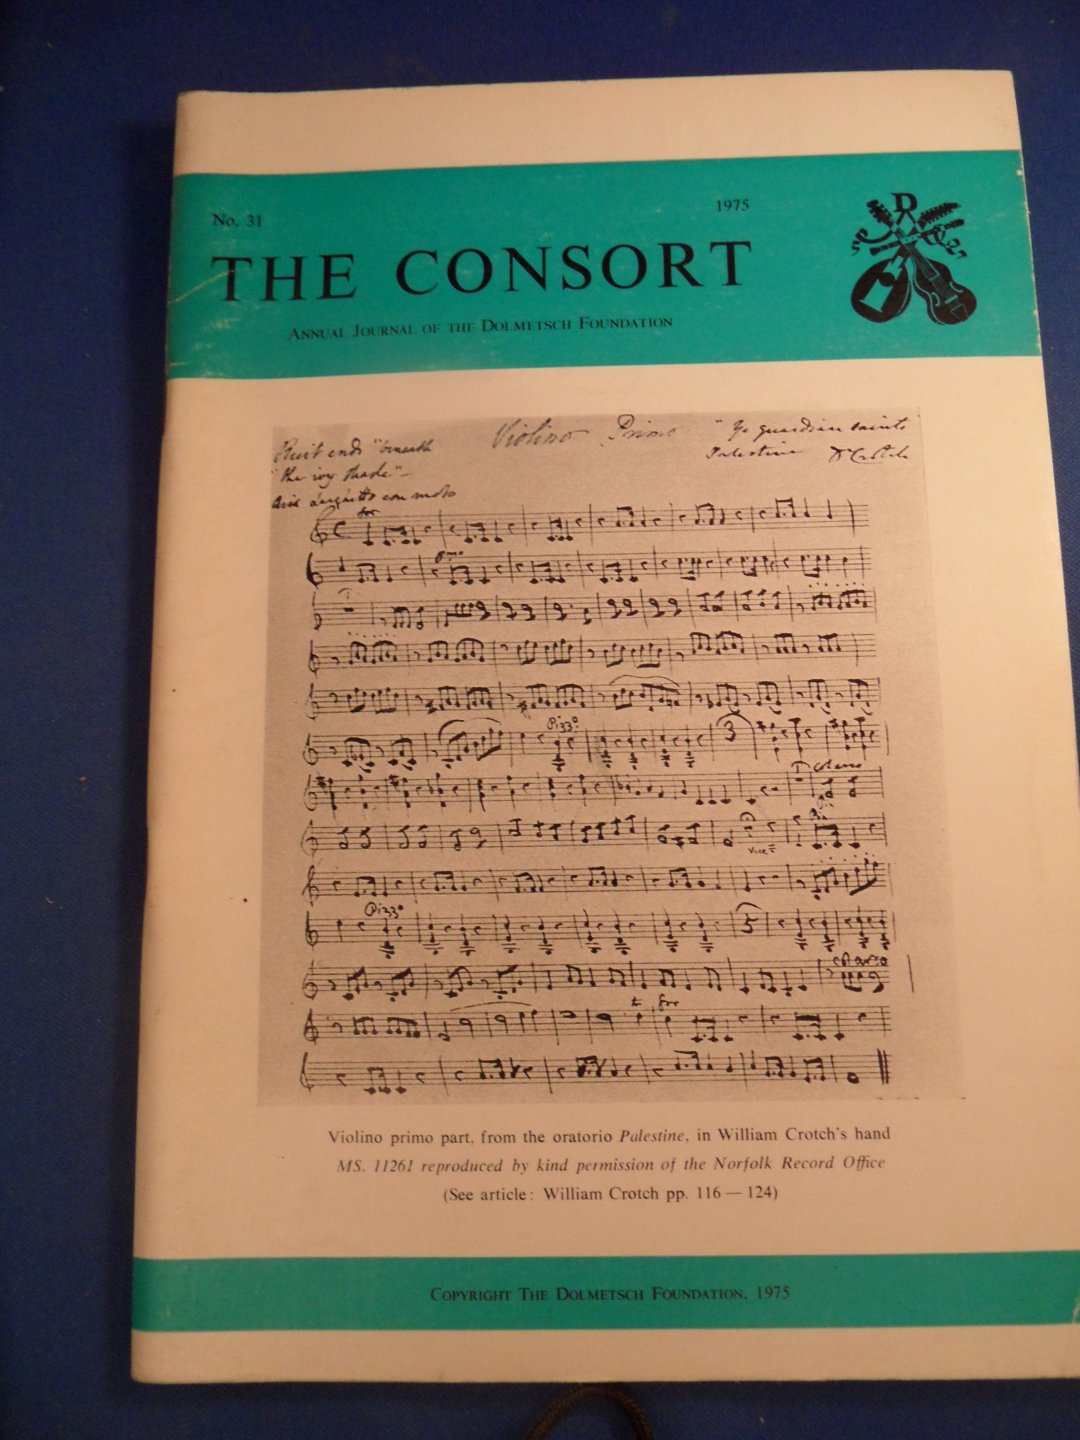 Dolmetsch foundation - The consort, no. 31 1975. Journal of the Dolmetsch foundation